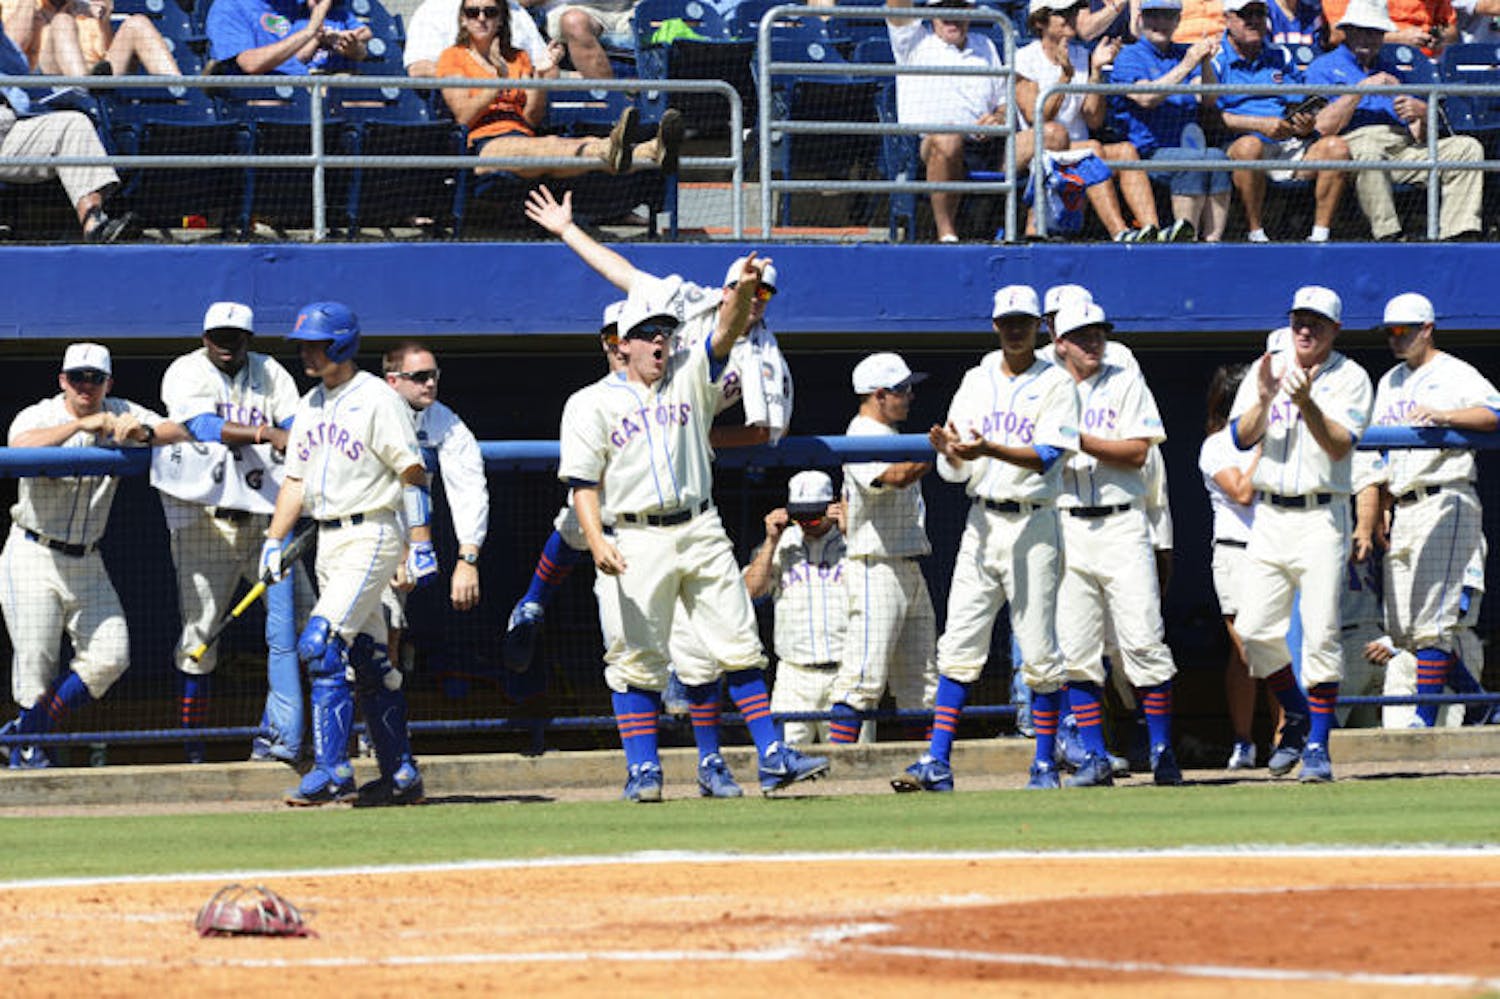 Florida players celebrate during a 14-5 victory against South Carolina on Saturday at McKethan Stadium. The victory sealed the Gators' series sweep against the Gamecocks.